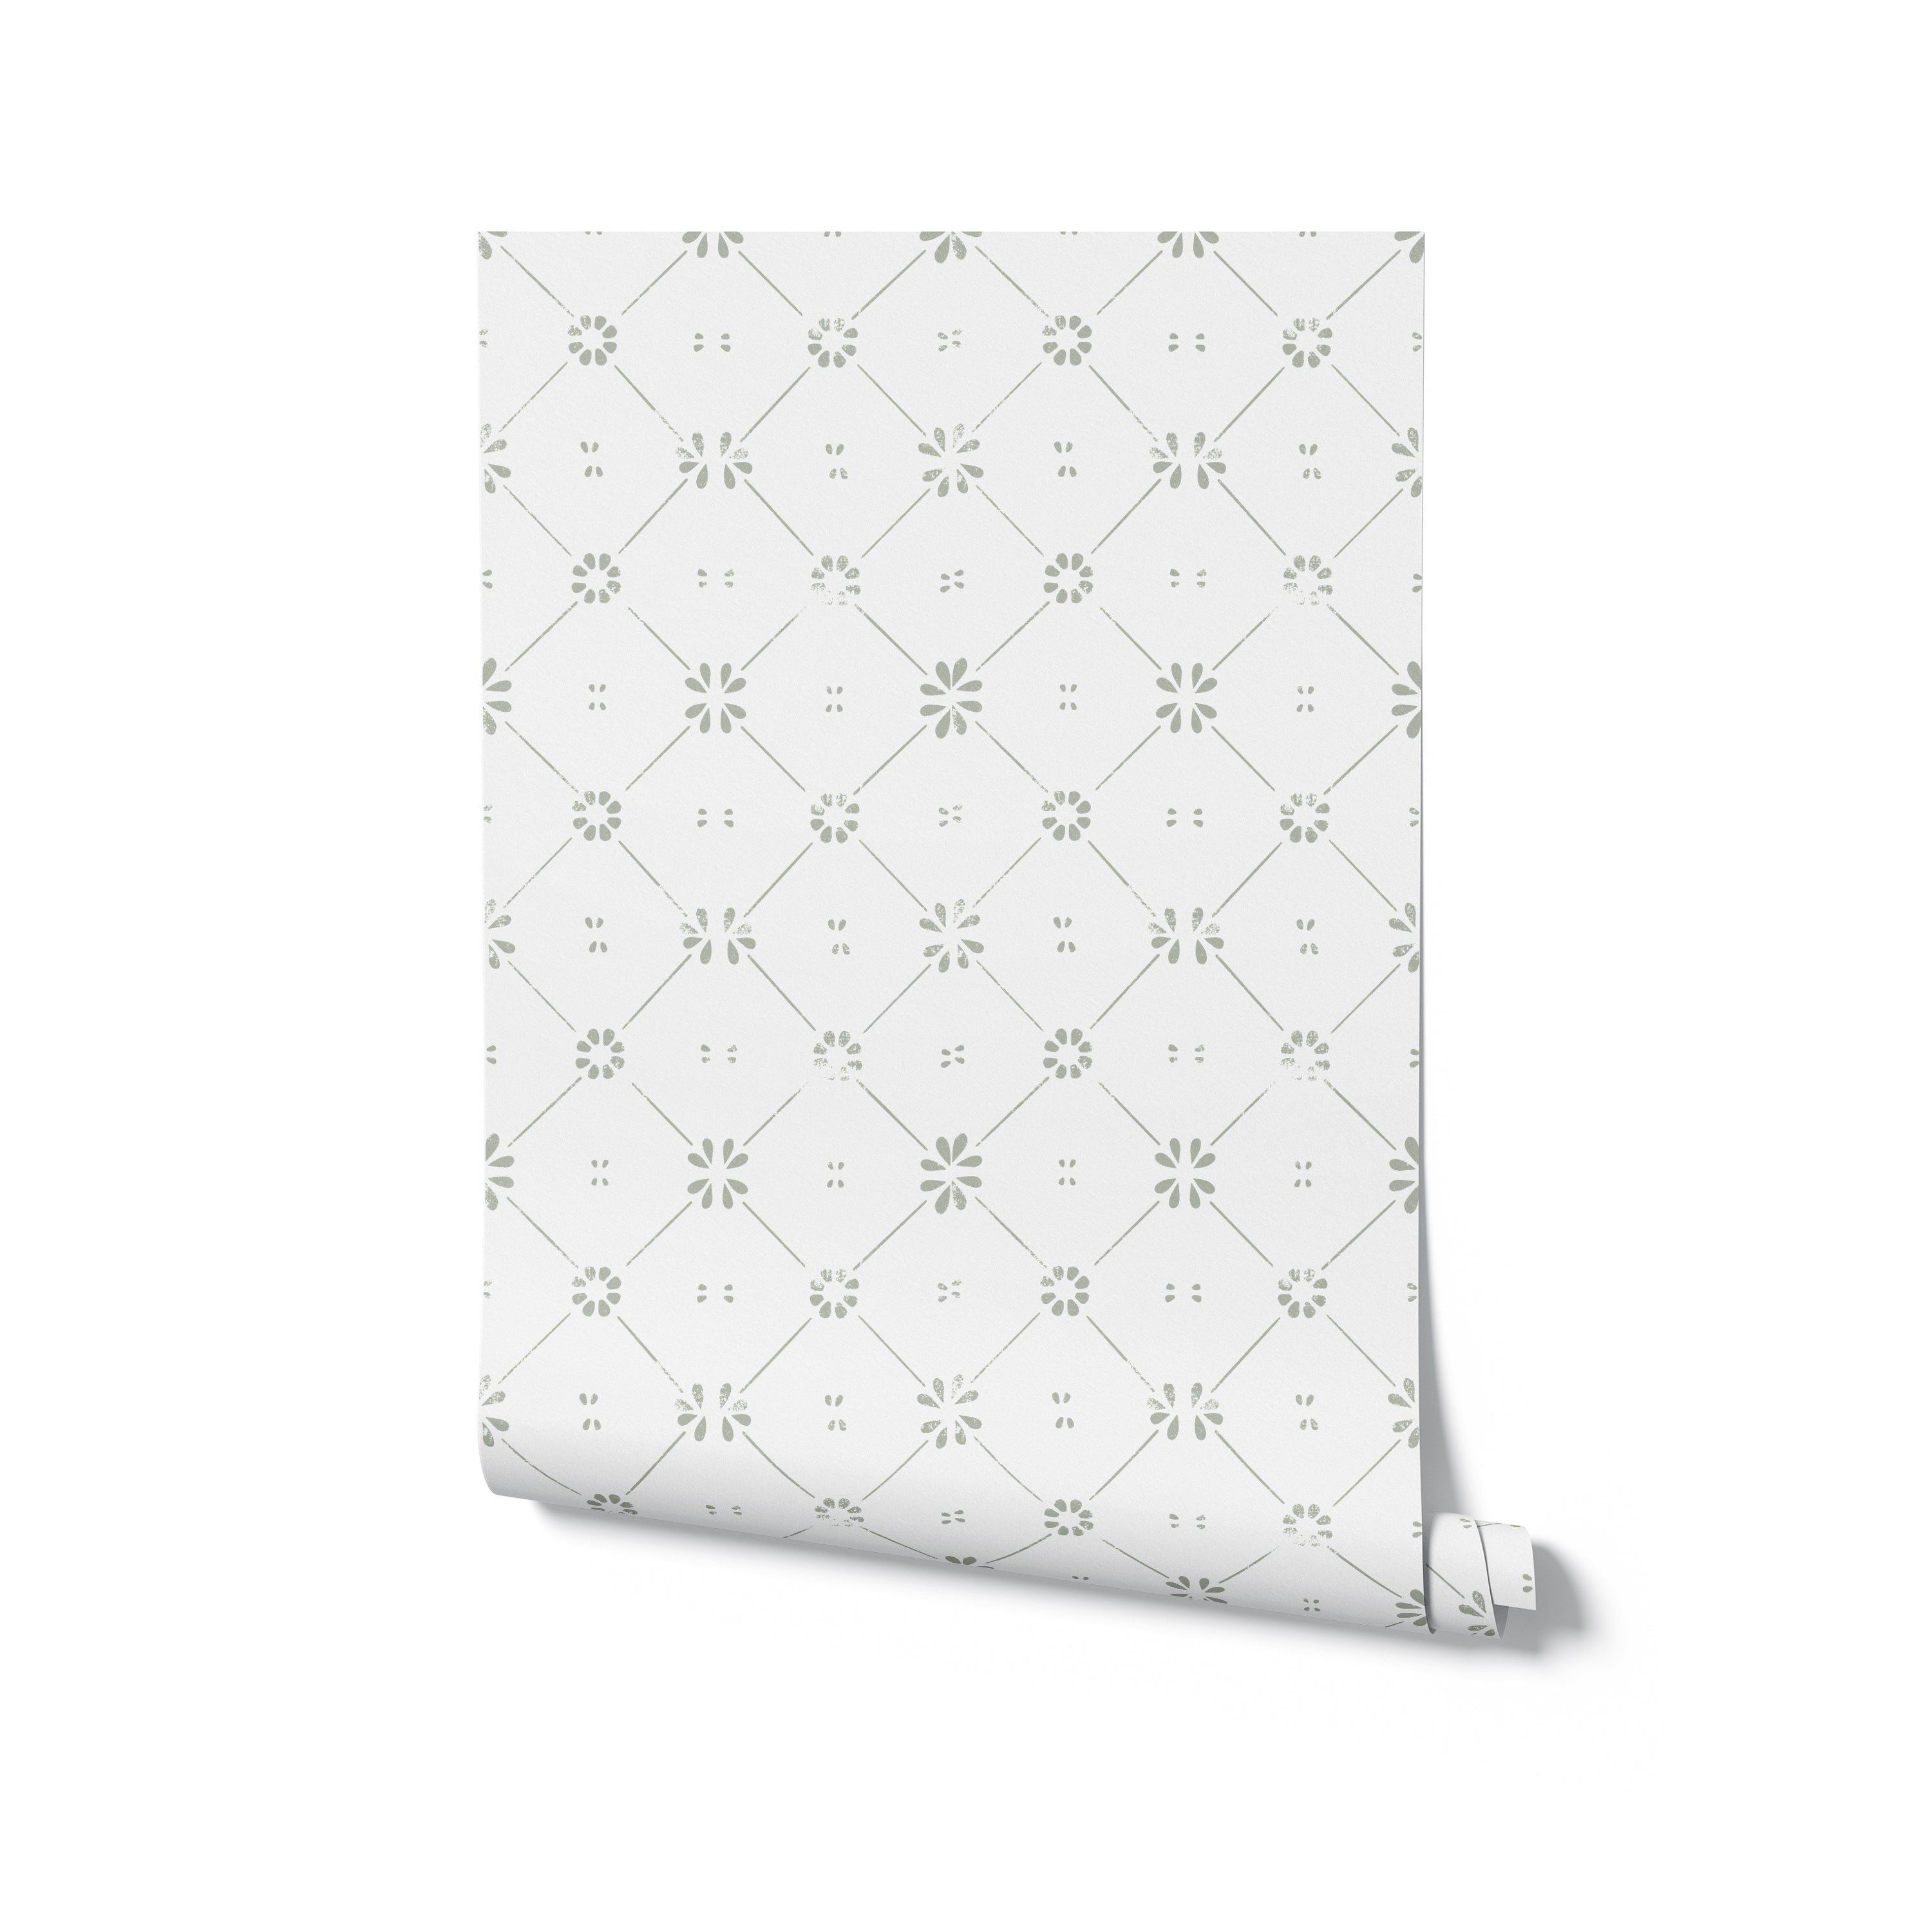 A flat lay view of a single roll of Floral Lattice Wallpaper. The roll showcases the detailed green floral pattern and lattice design on a white background, emphasizing the elegant and classic style of the wallpaper.